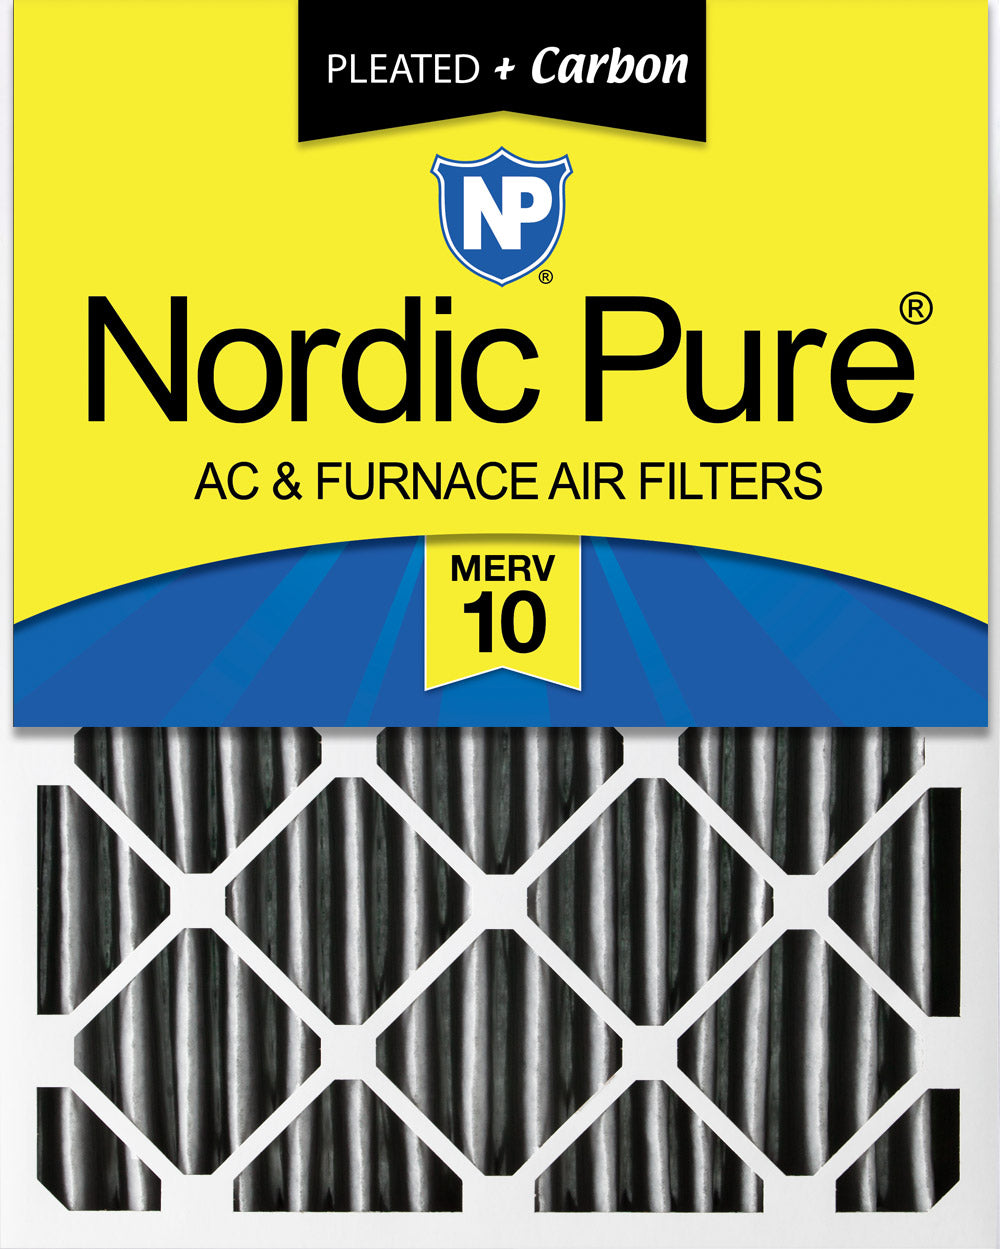 20x20x4 (3 5/8) Furnace Air Filters MERV 10 Pleated Plus Carbon